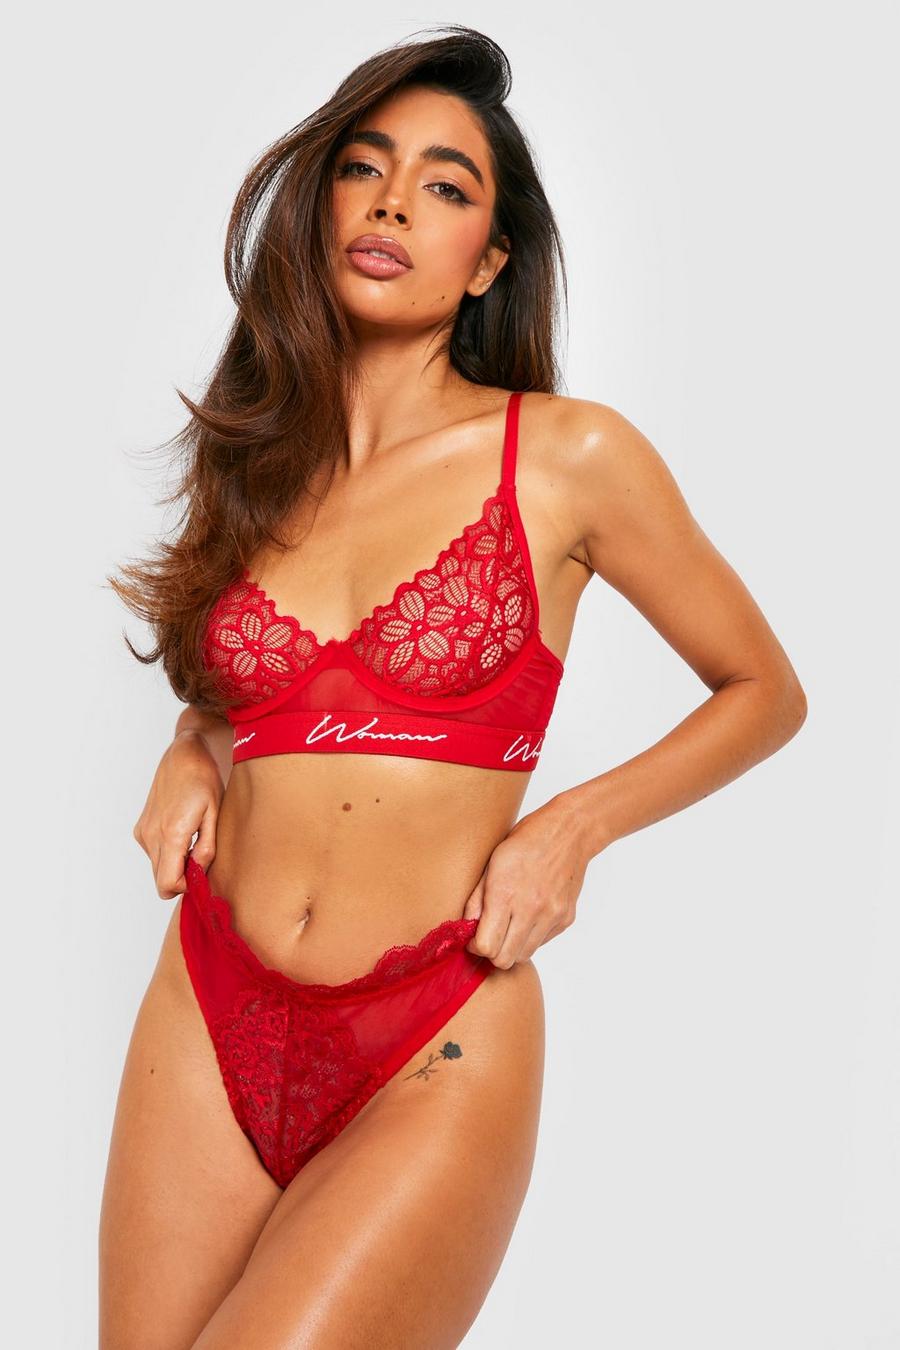 Sexy Lingerie for Valentine's Day